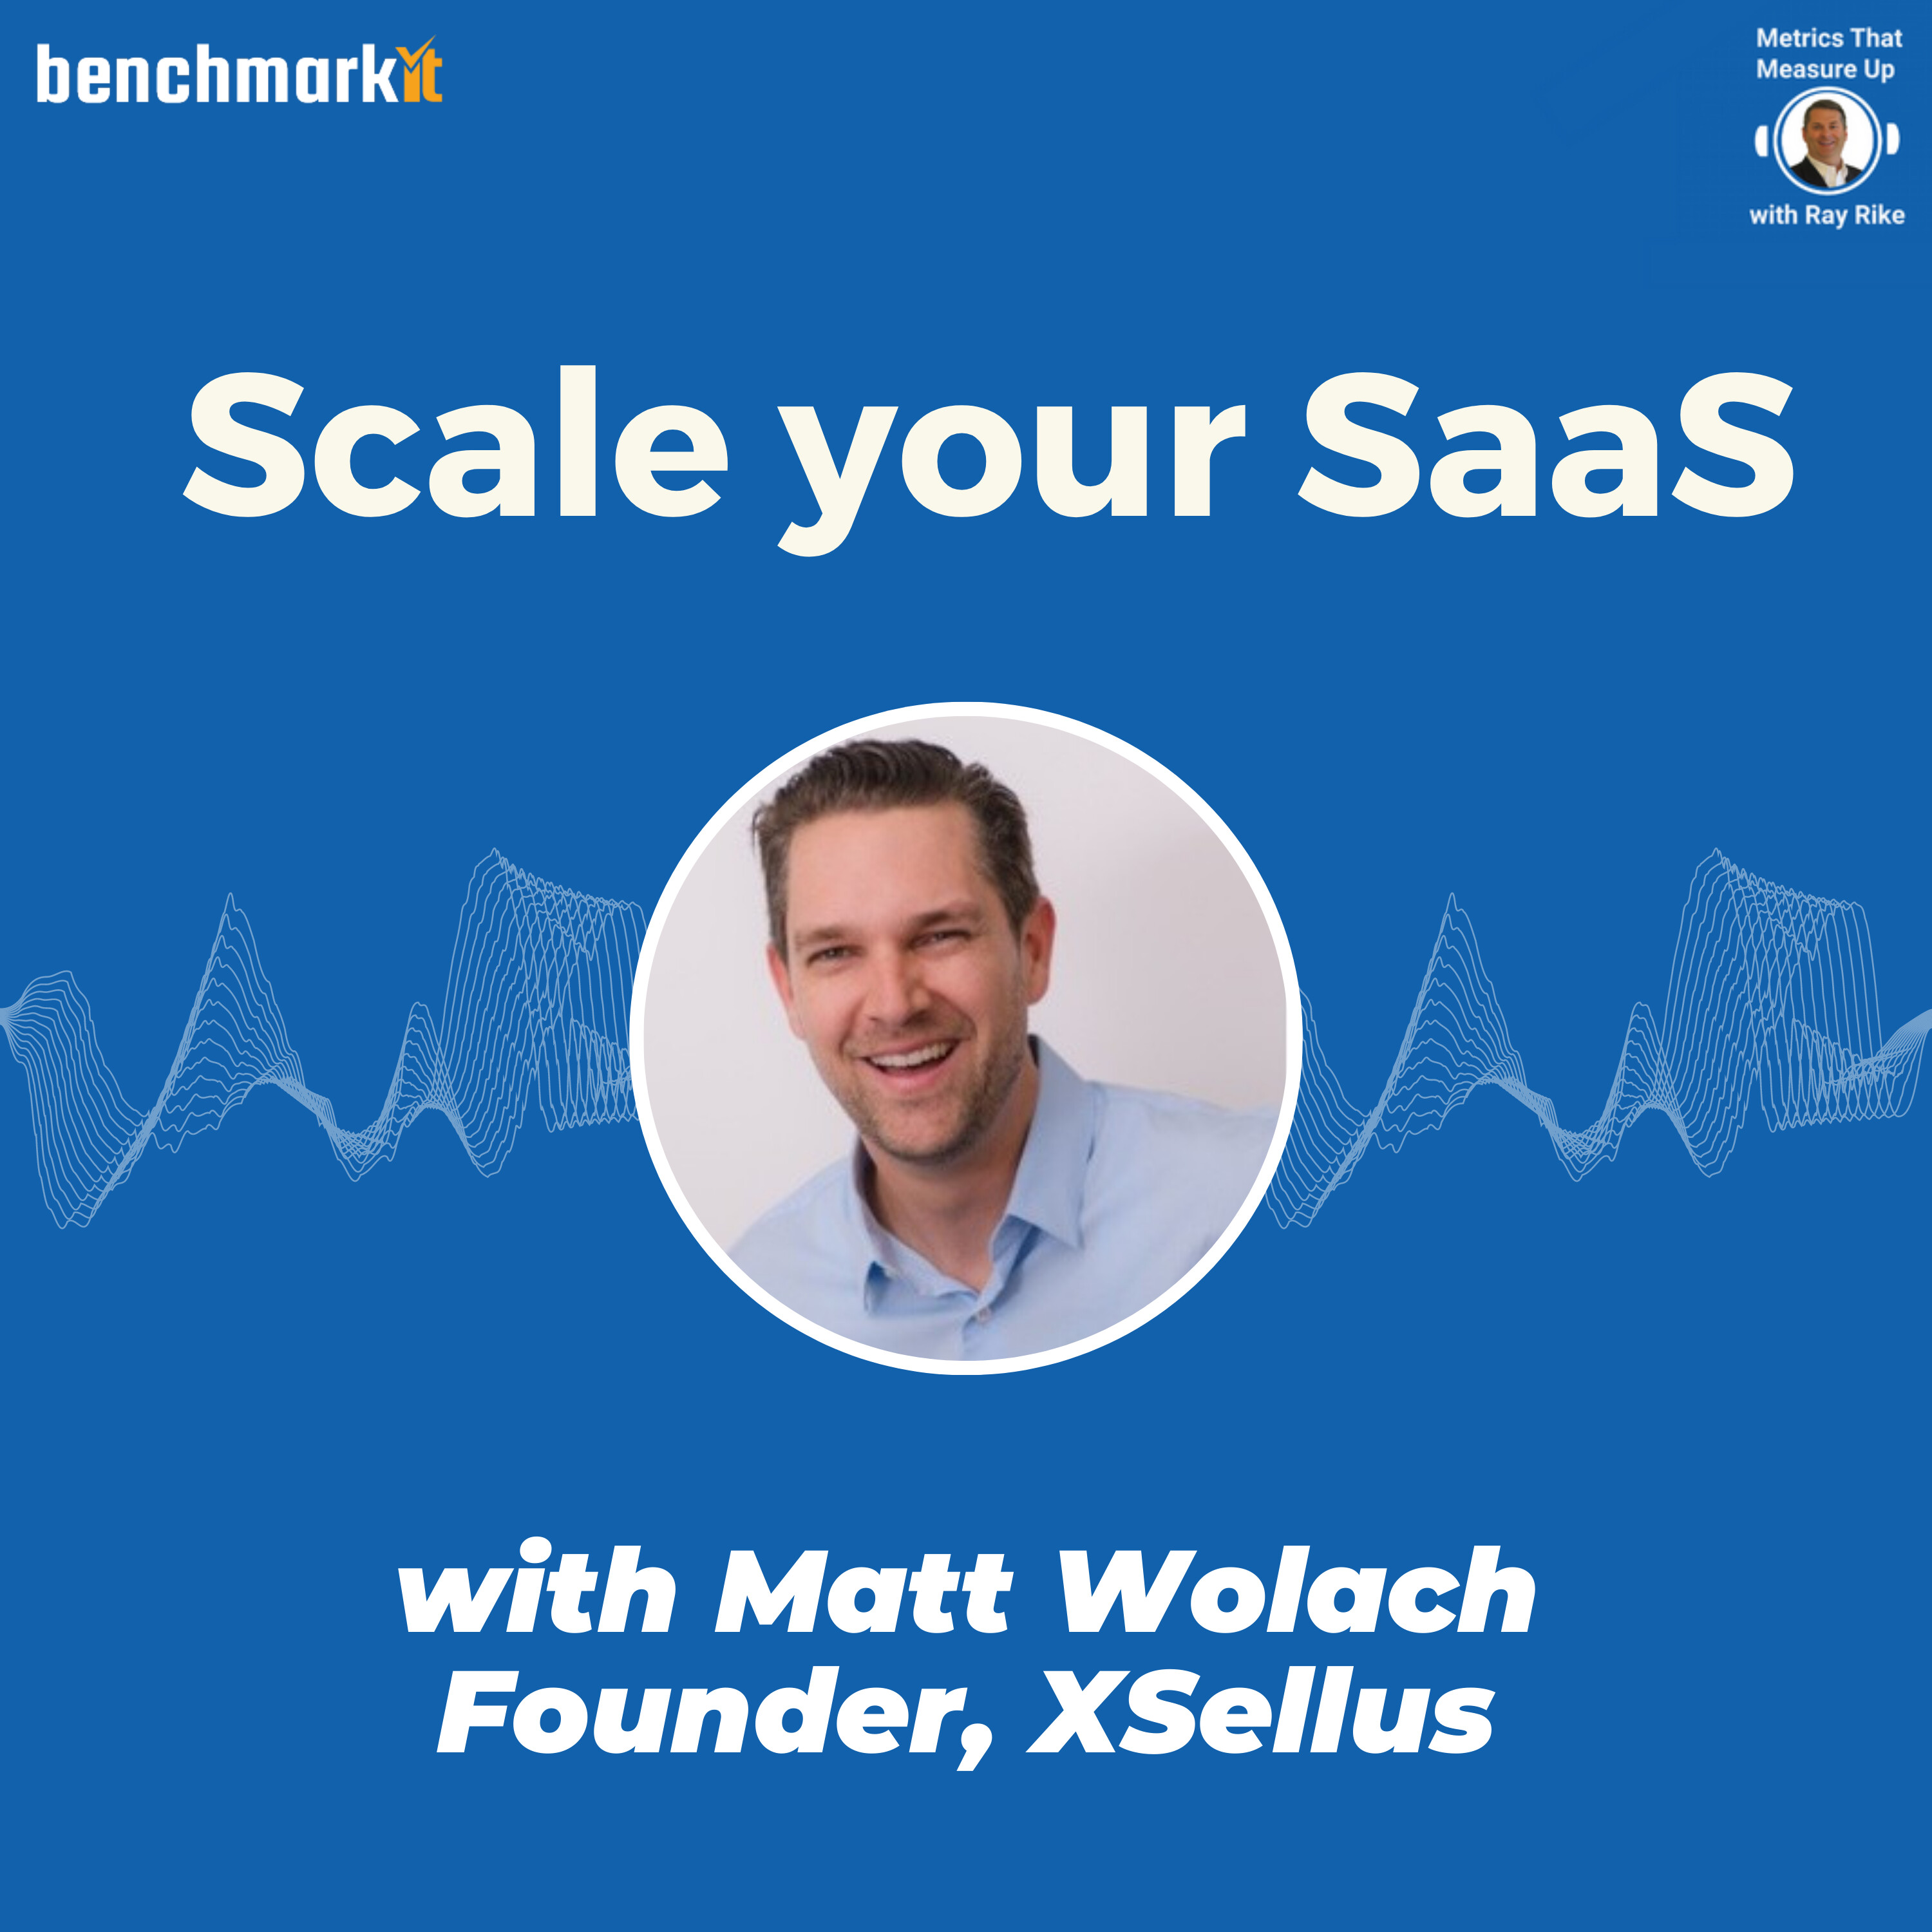 Scale your SaaS - with Matt Wolach, founder of Xsellus and 